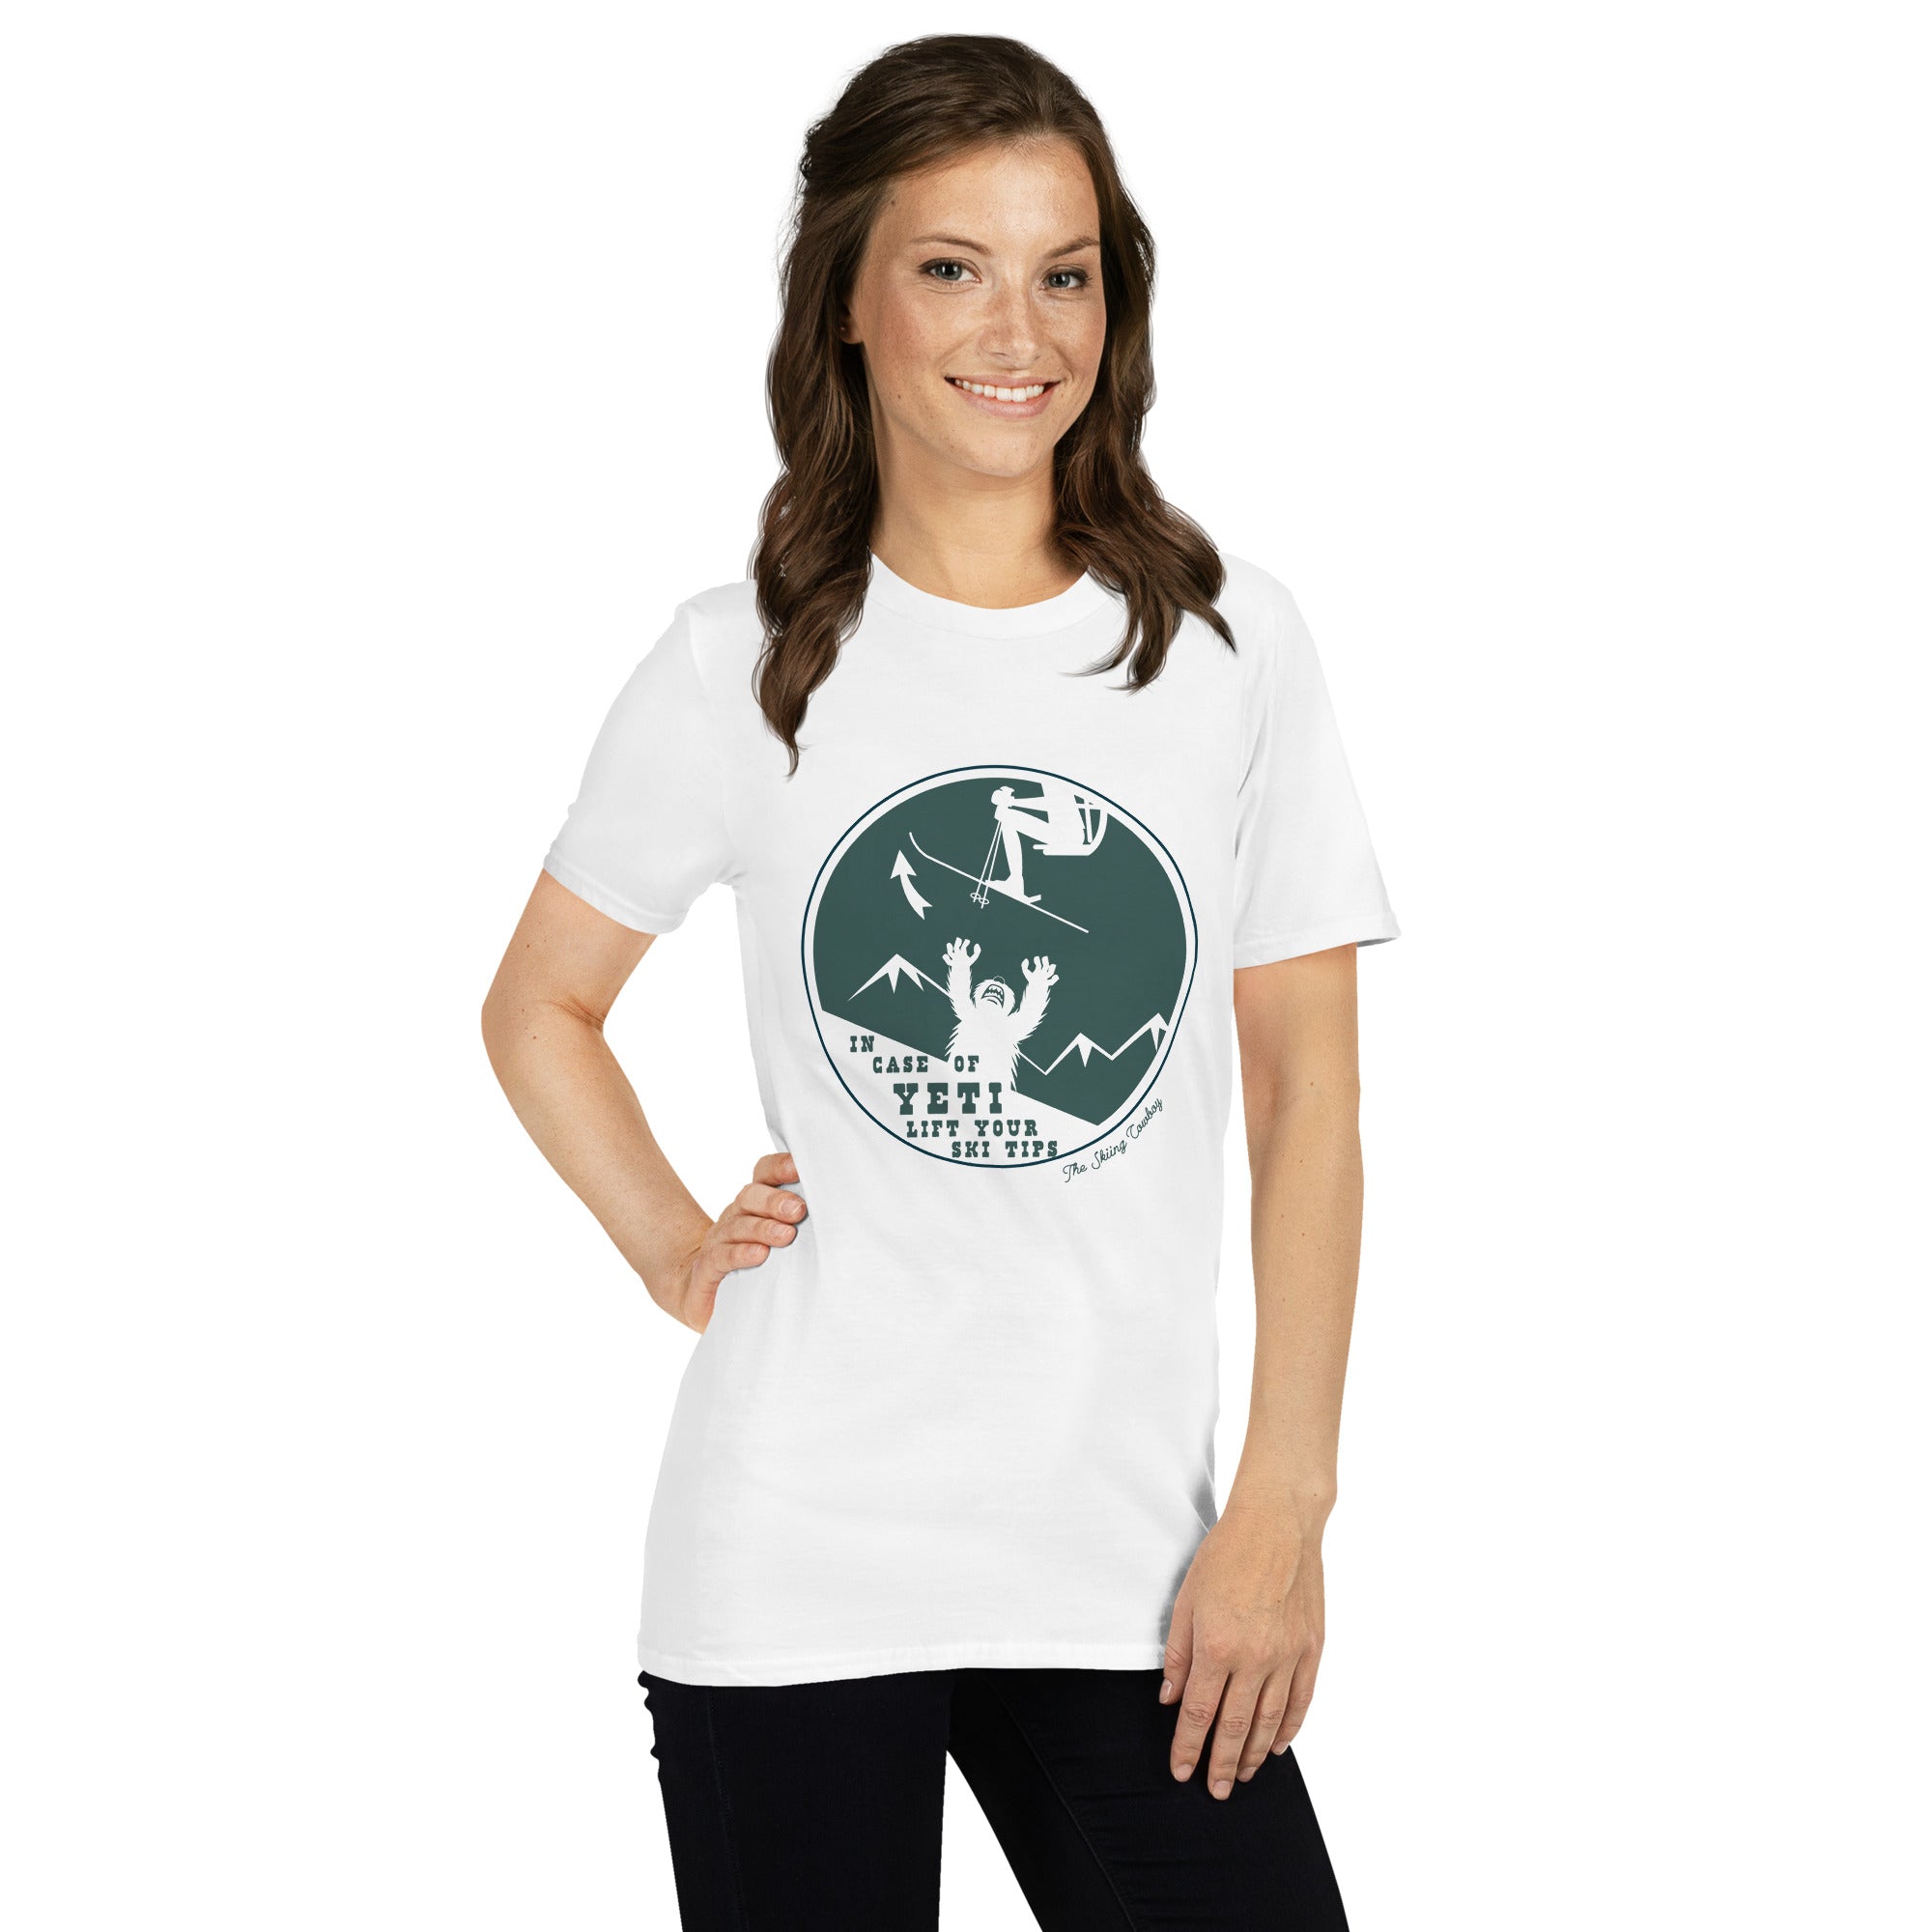 T-shirt softstyle en coton In case of Yeti, lift your ski tips